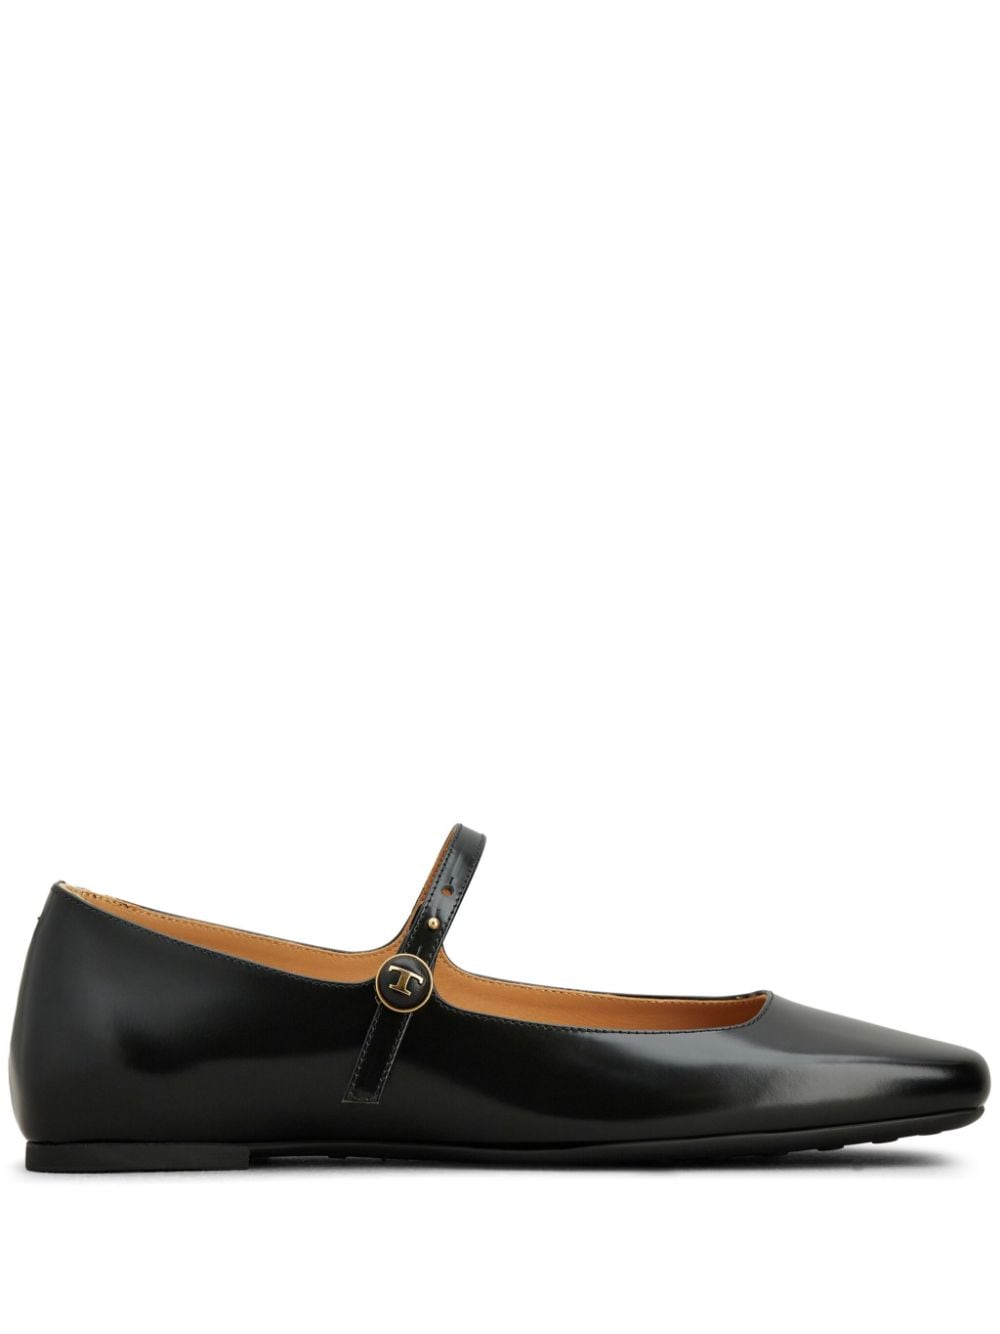 TOD'S LEATHER BALLET FLATS